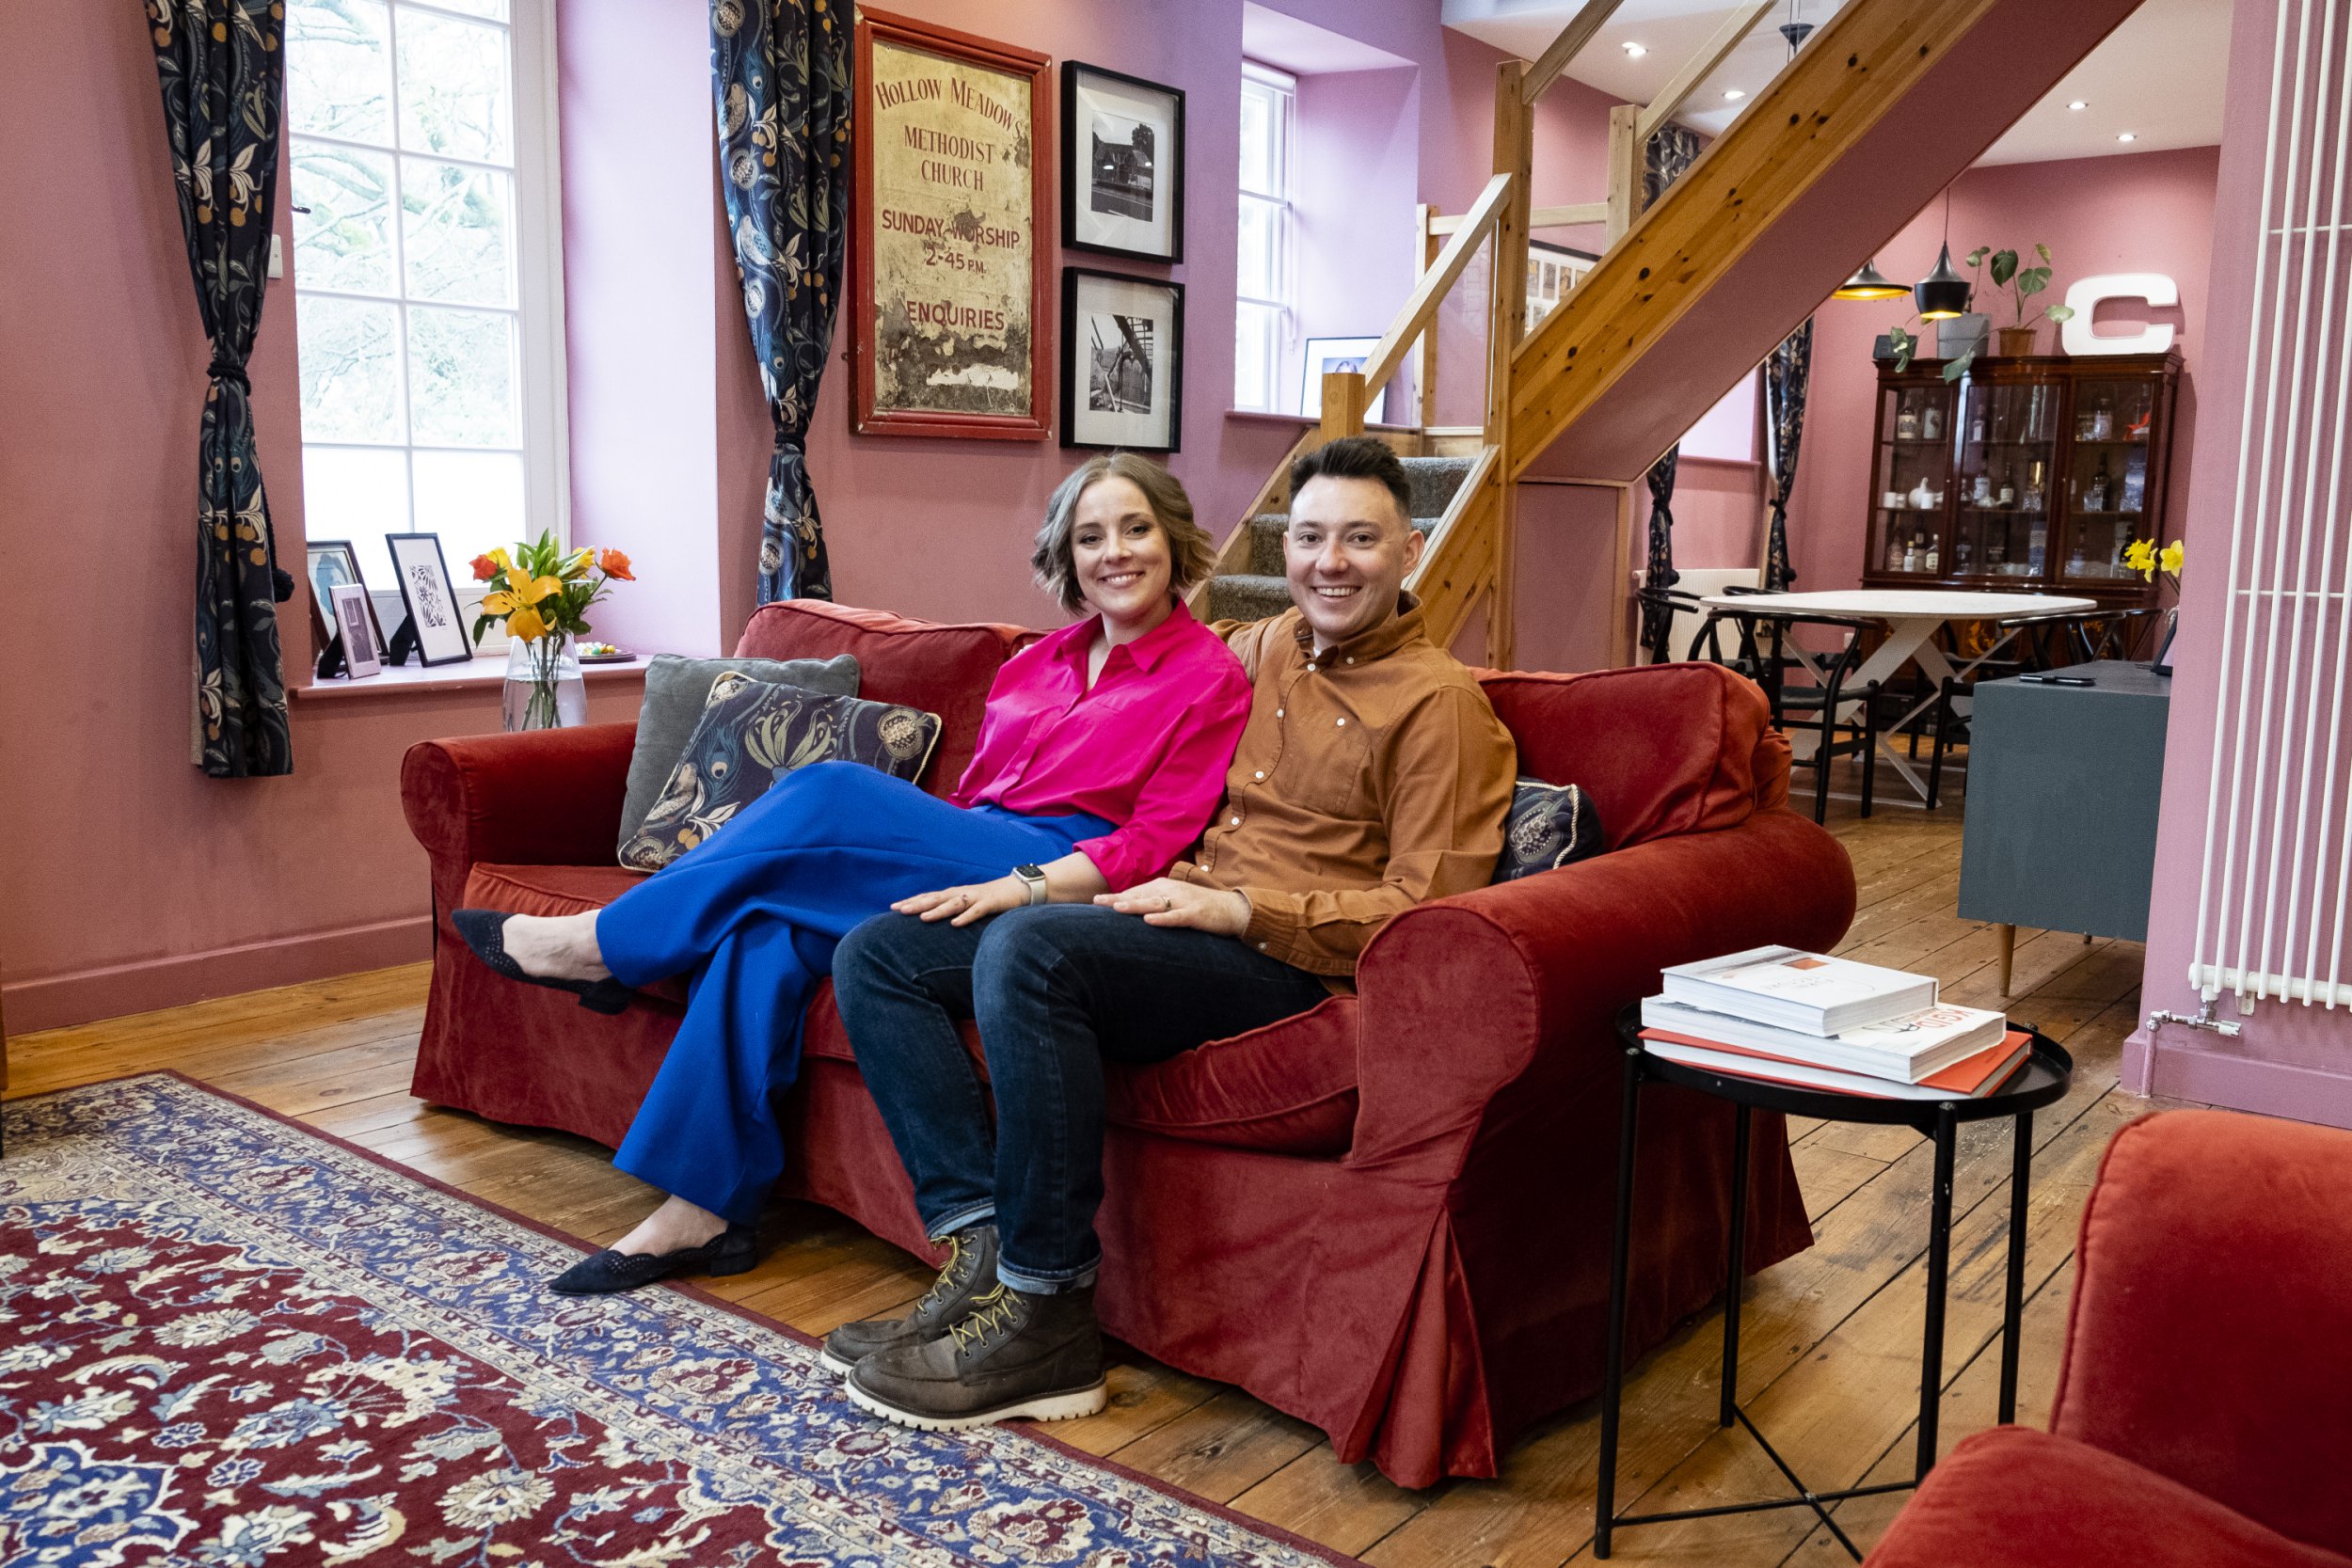 What I Own: Jessica and Ollie, who spent £250,000 renovating a former Methodist Church